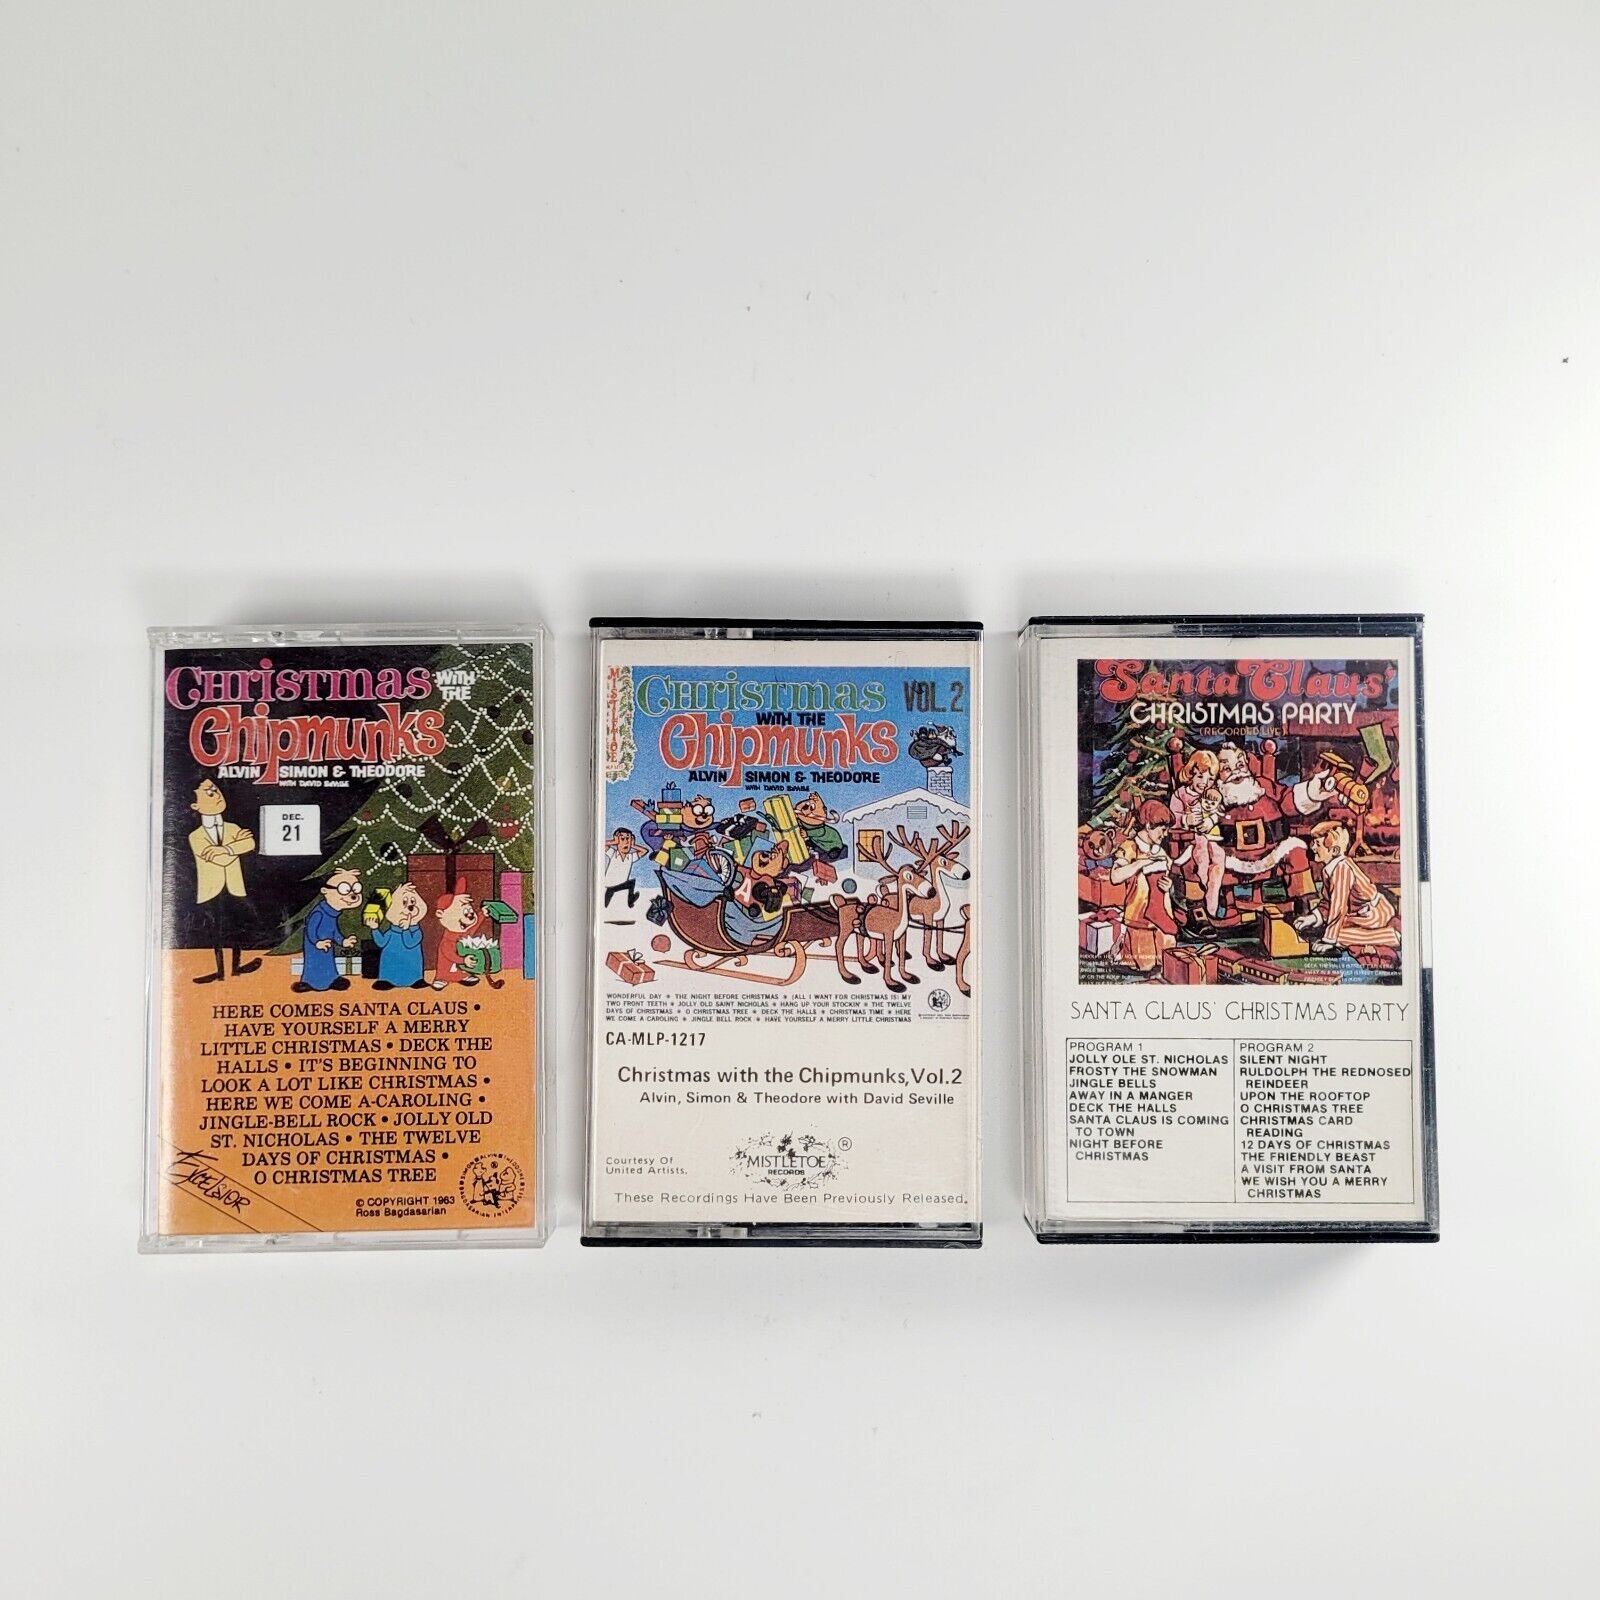 3 Vintage Kids Christmas With The Chipmunks Cassette Tapes Santa Claus Party